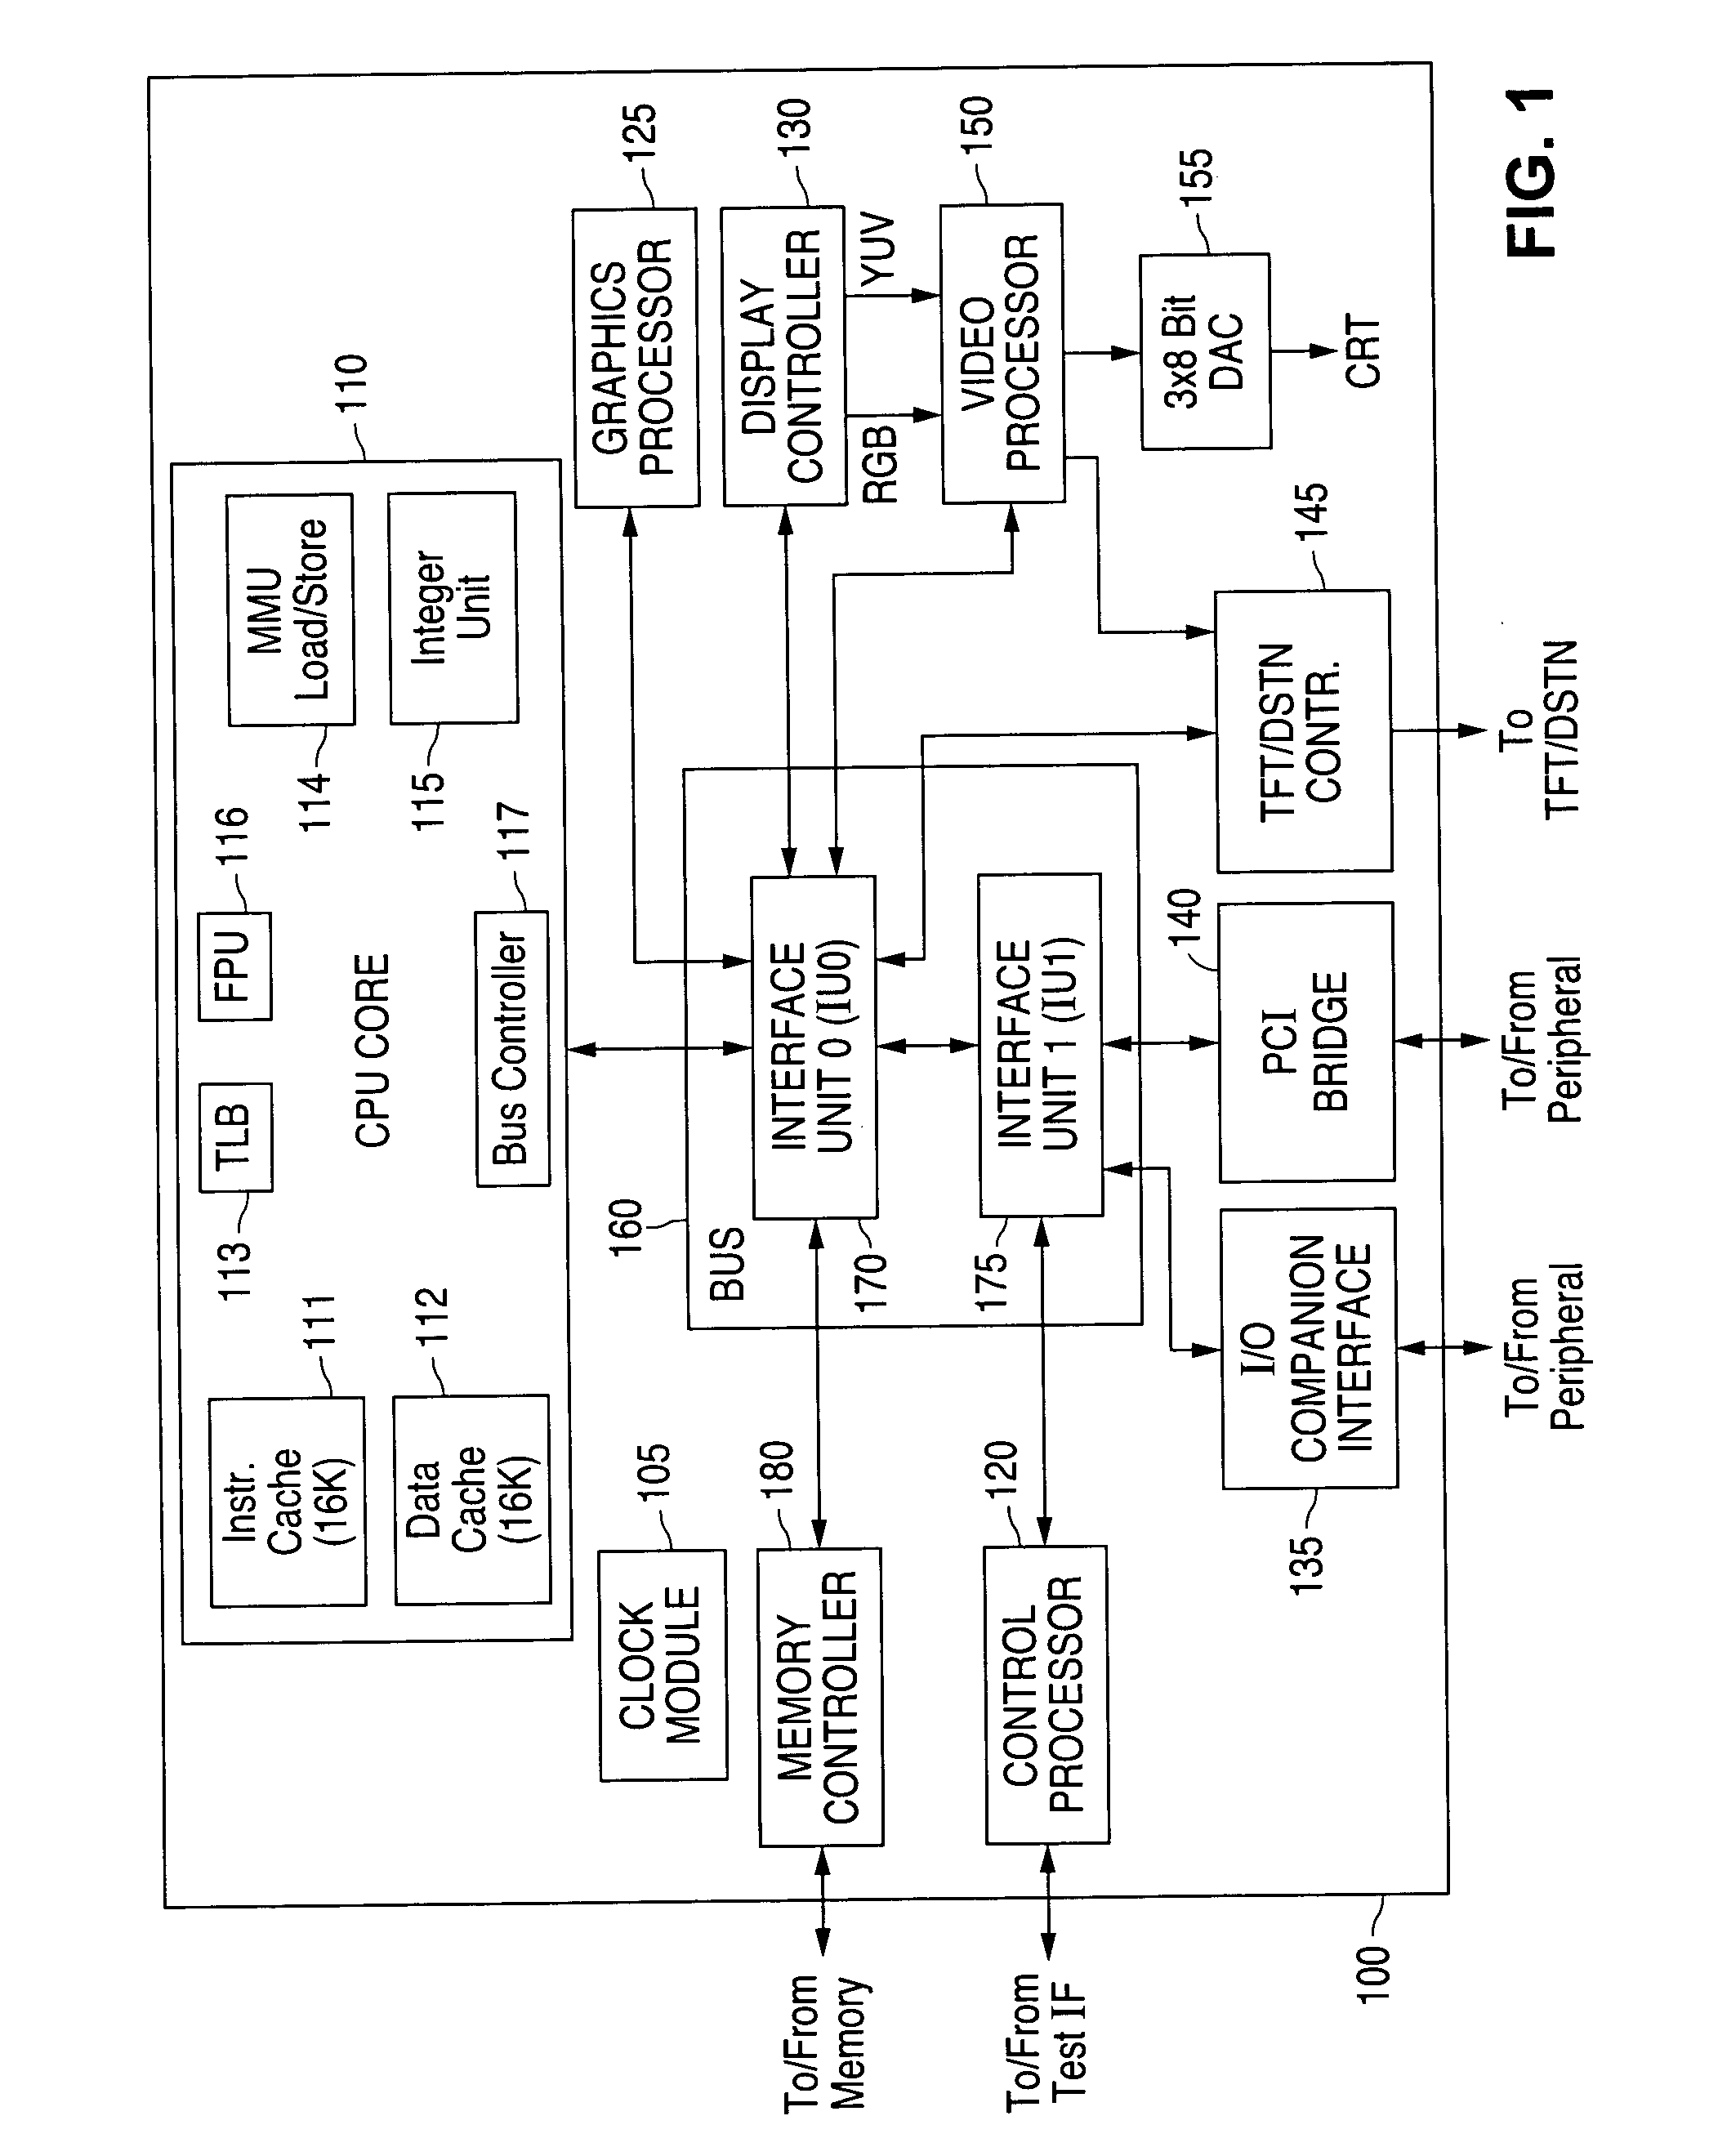 Apparatus and method for isochronous arbitration to schedule memory refresh requests